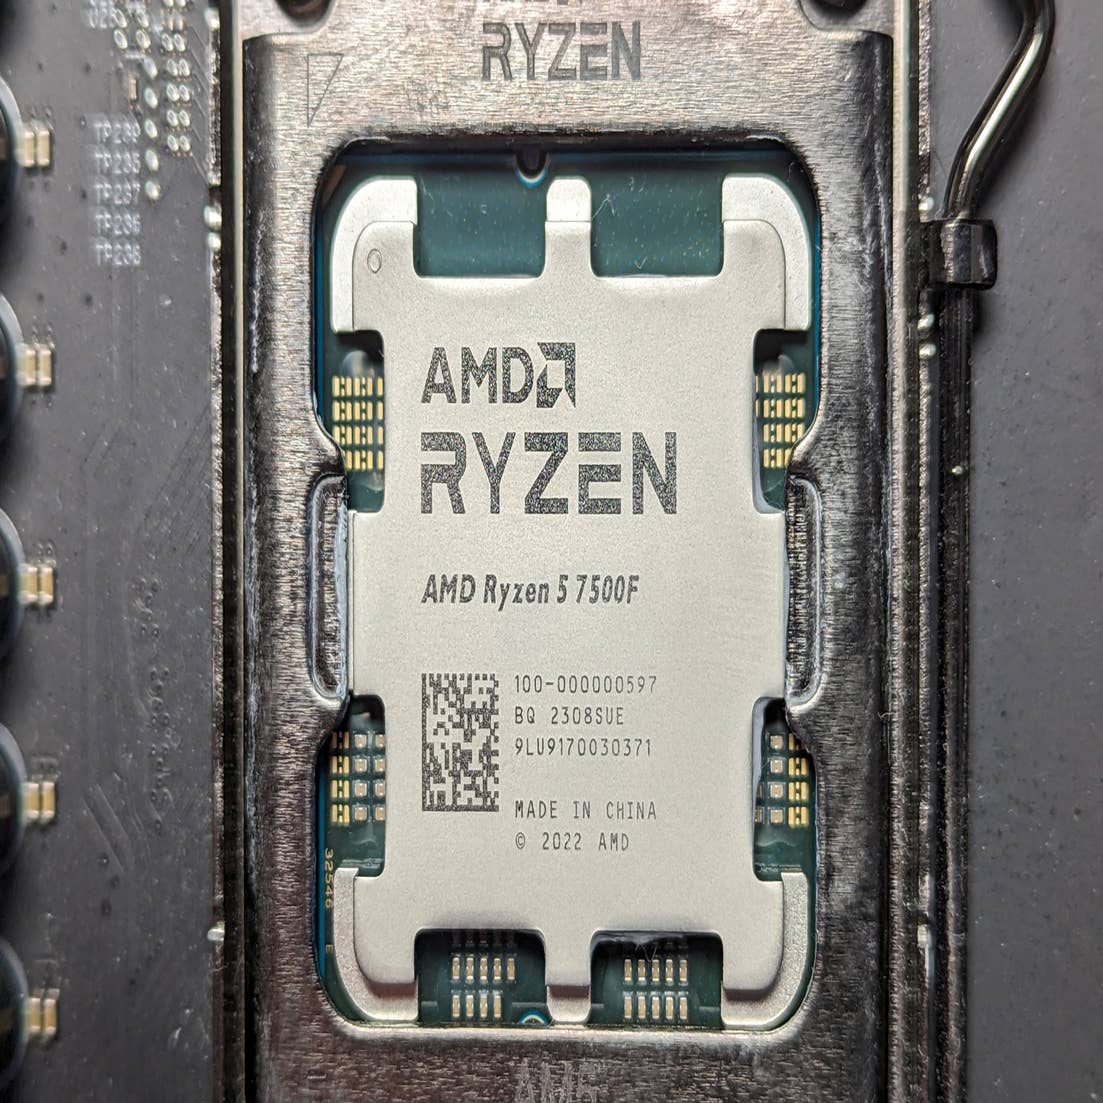 AMD Ryzen 9 7900 and Ryzen 5 7600 Review - Gaming and workstation